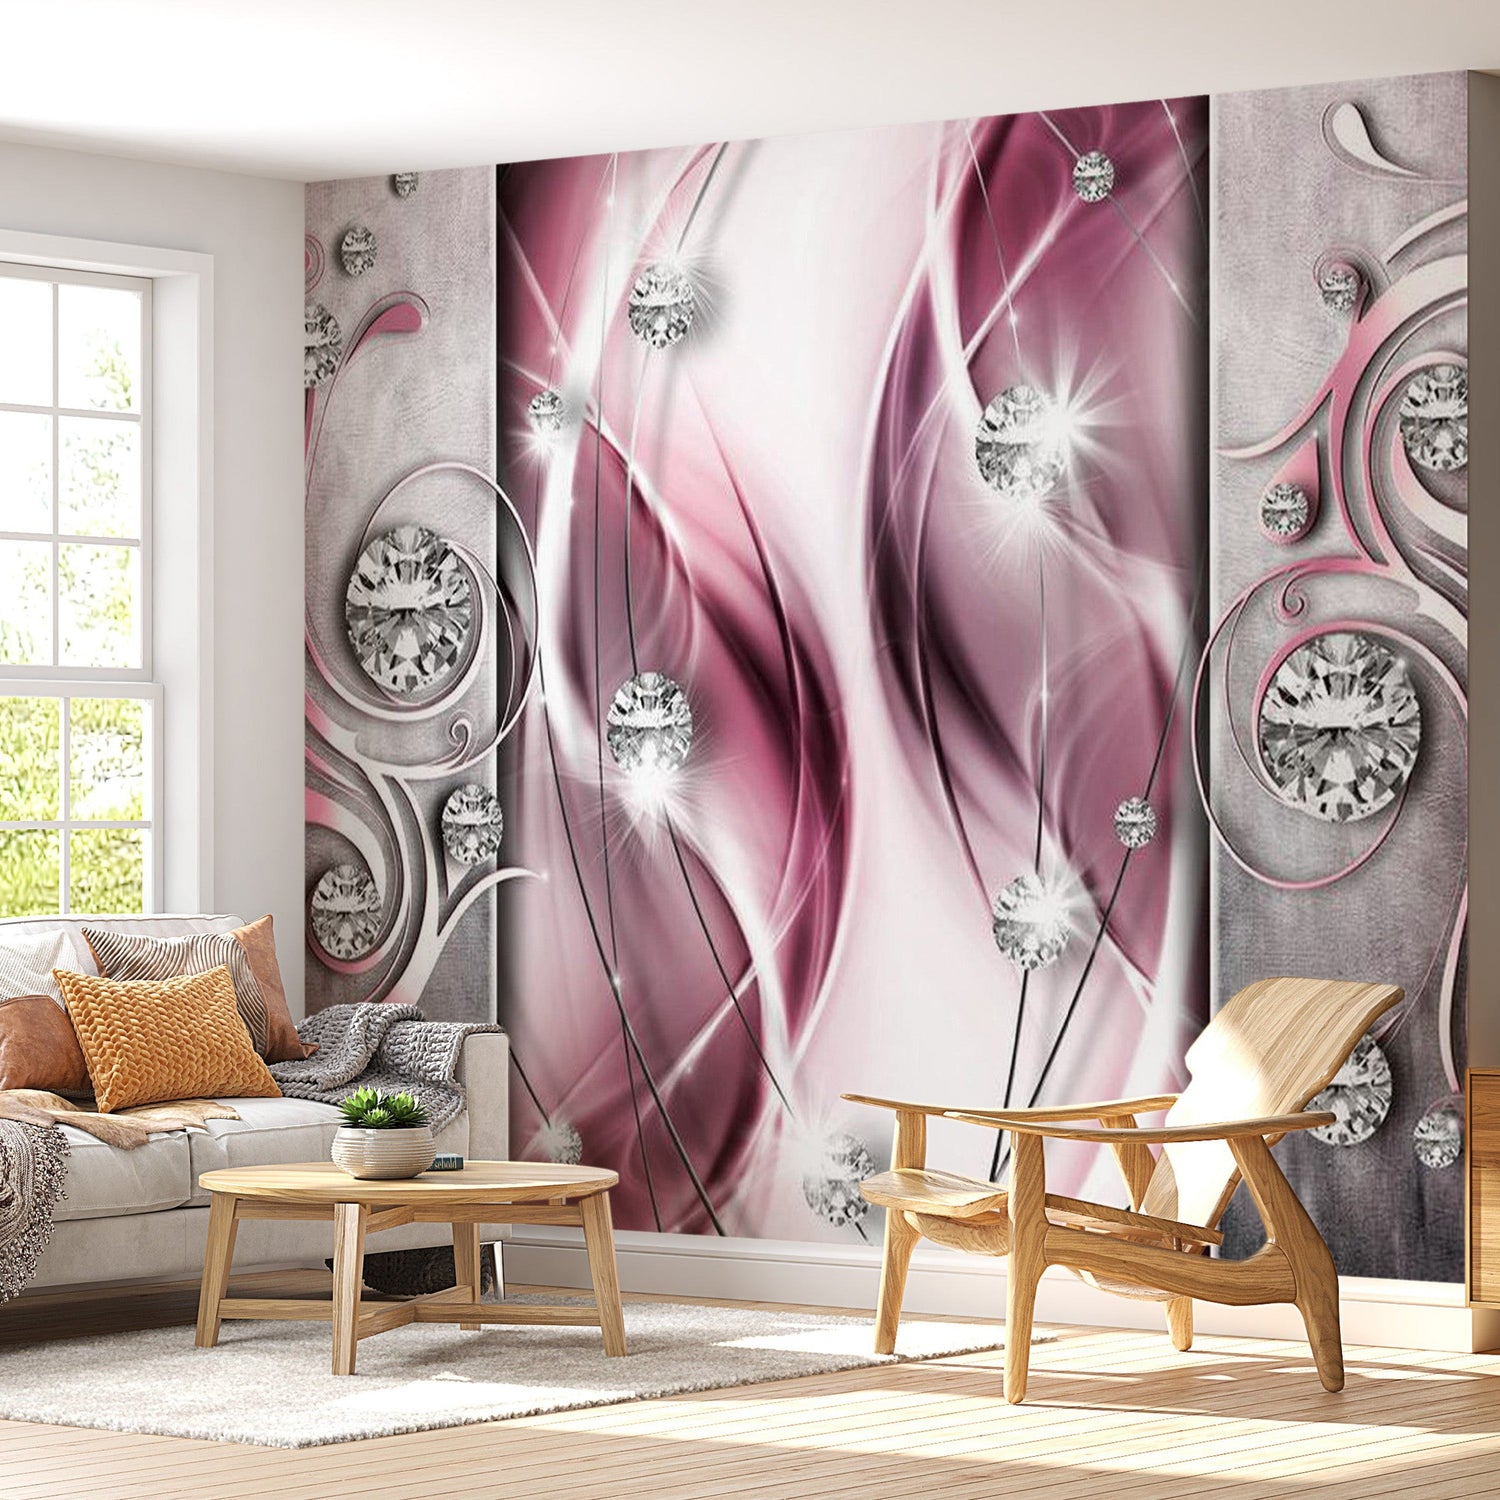 Peel & Stick Glam Wall Mural - Pink And Diamonds - Removable Wall Decals